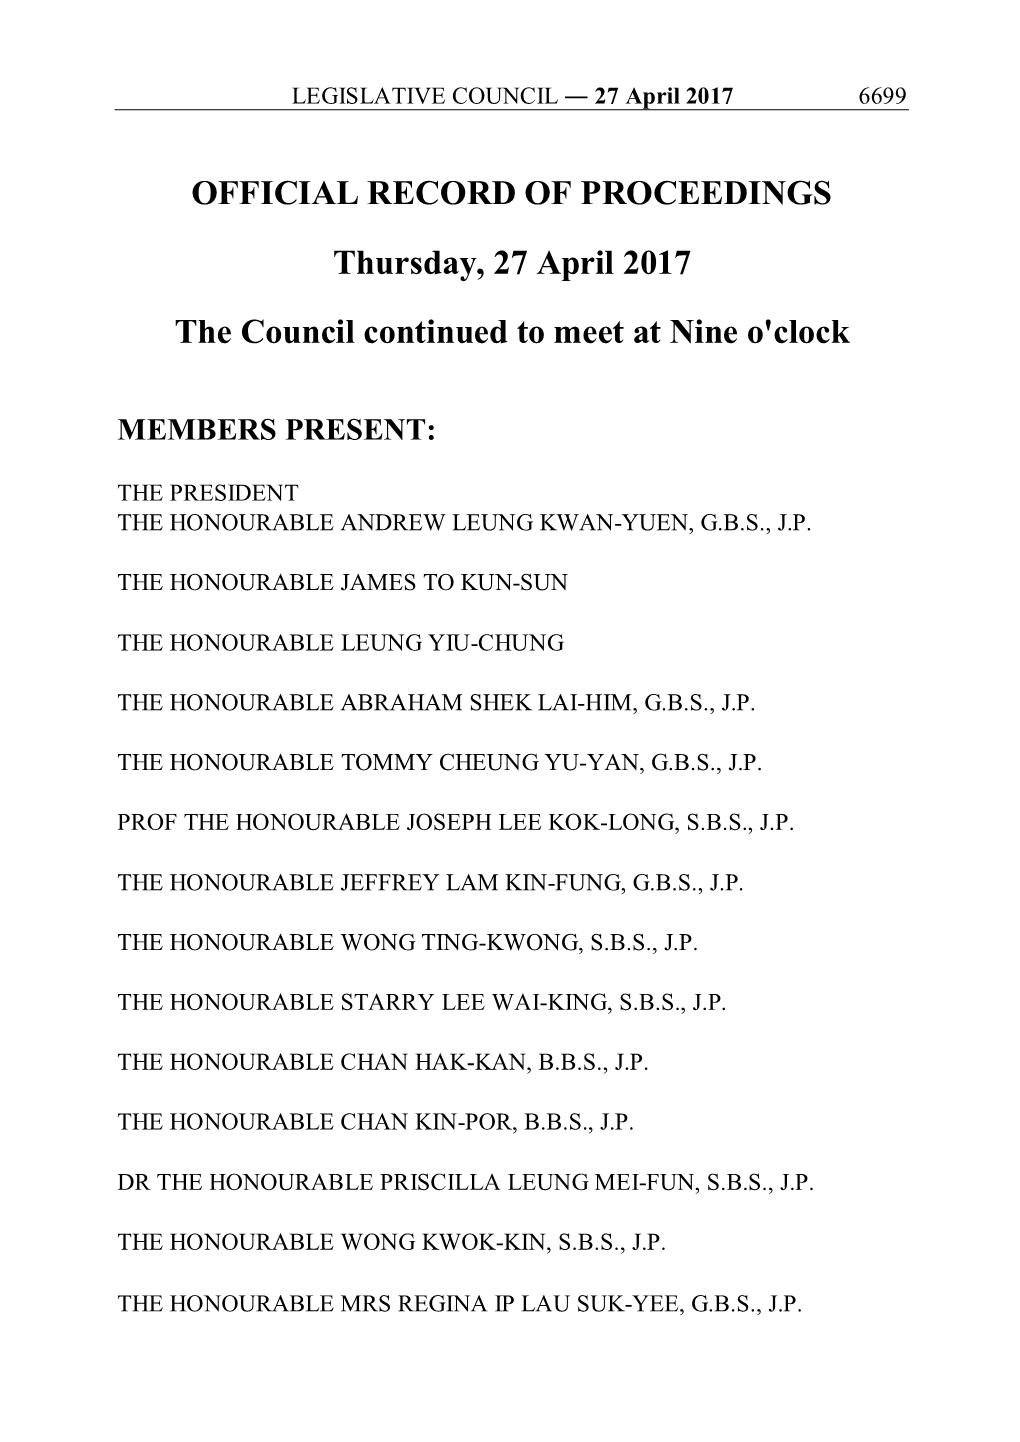 OFFICIAL RECORD of PROCEEDINGS Thursday, 27 April